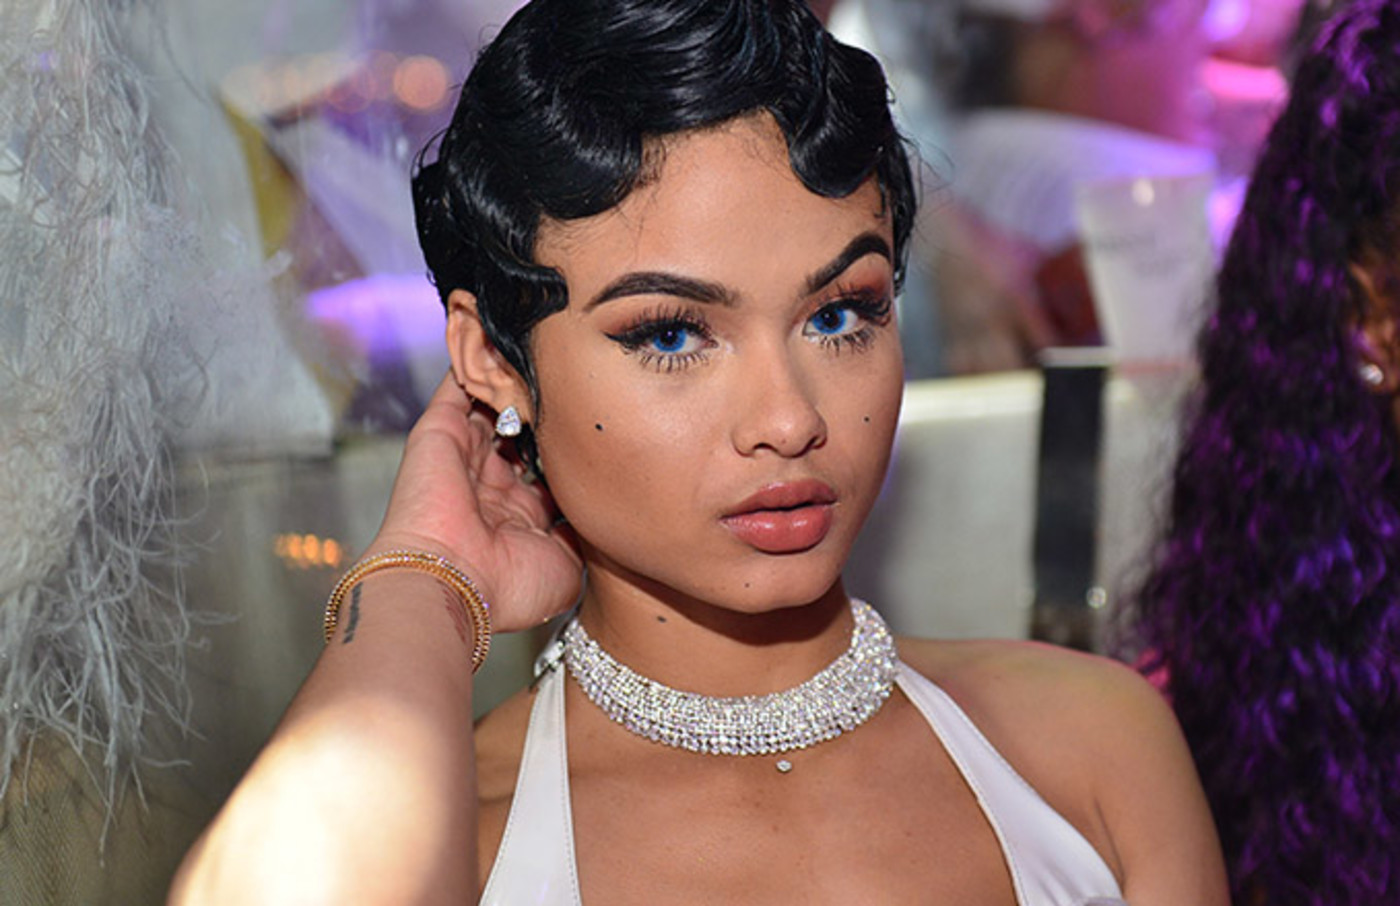 India Love Westbrooks / @indialove - Online Personalities - Pretty Ugly  Little Liar